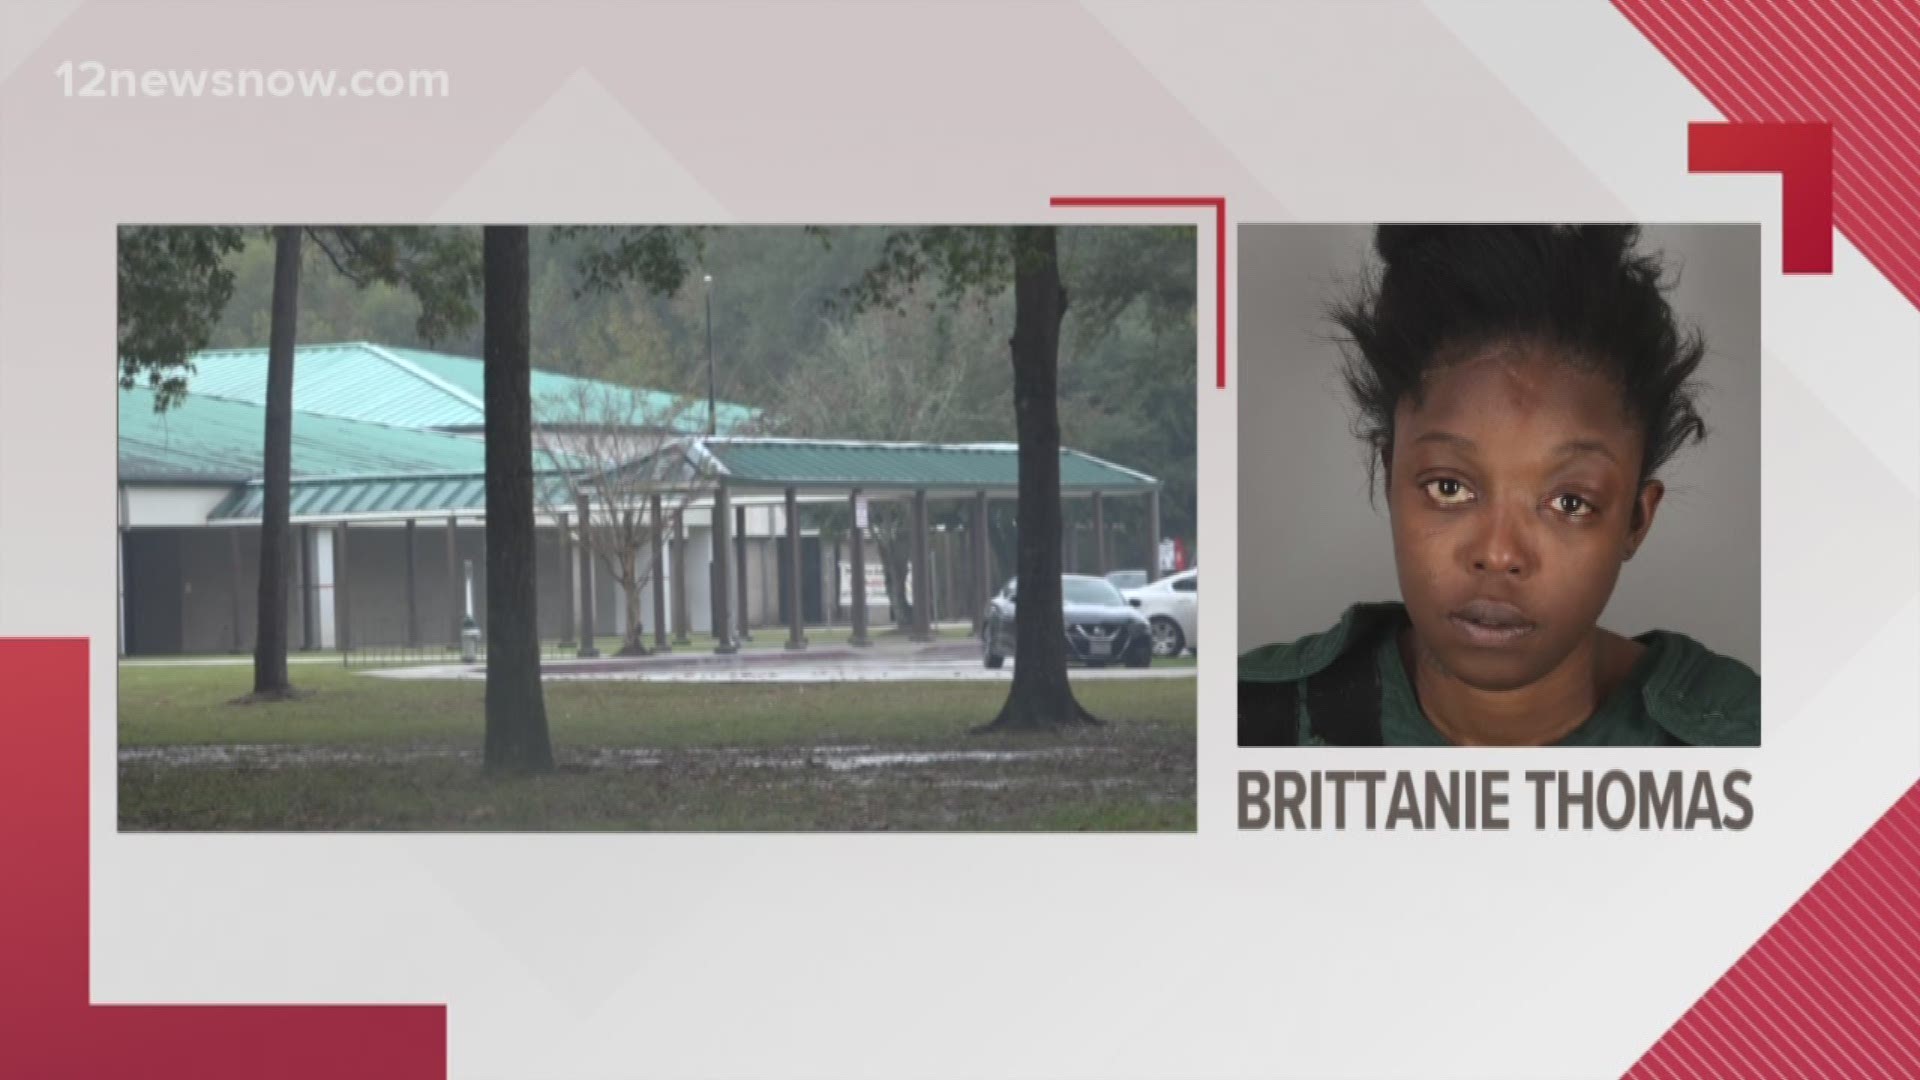 Brittanie Thomas is charged after the video circulated in November.